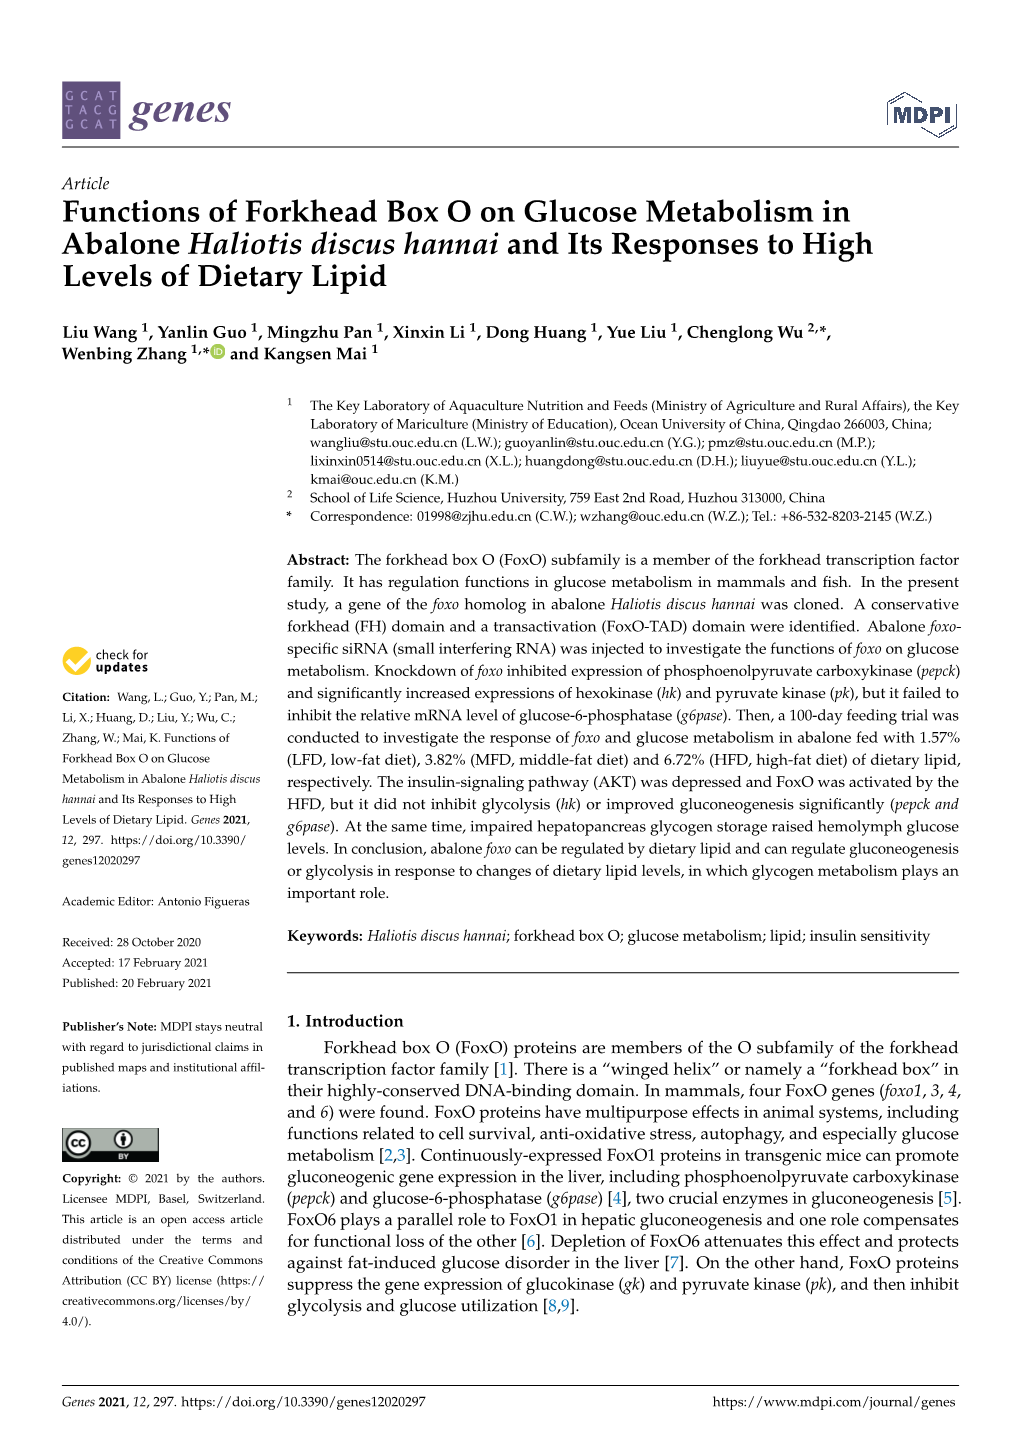 Functions of Forkhead Box O on Glucose Metabolism in Abalone Haliotis Discus Hannai and Its Responses to High Levels of Dietary Lipid